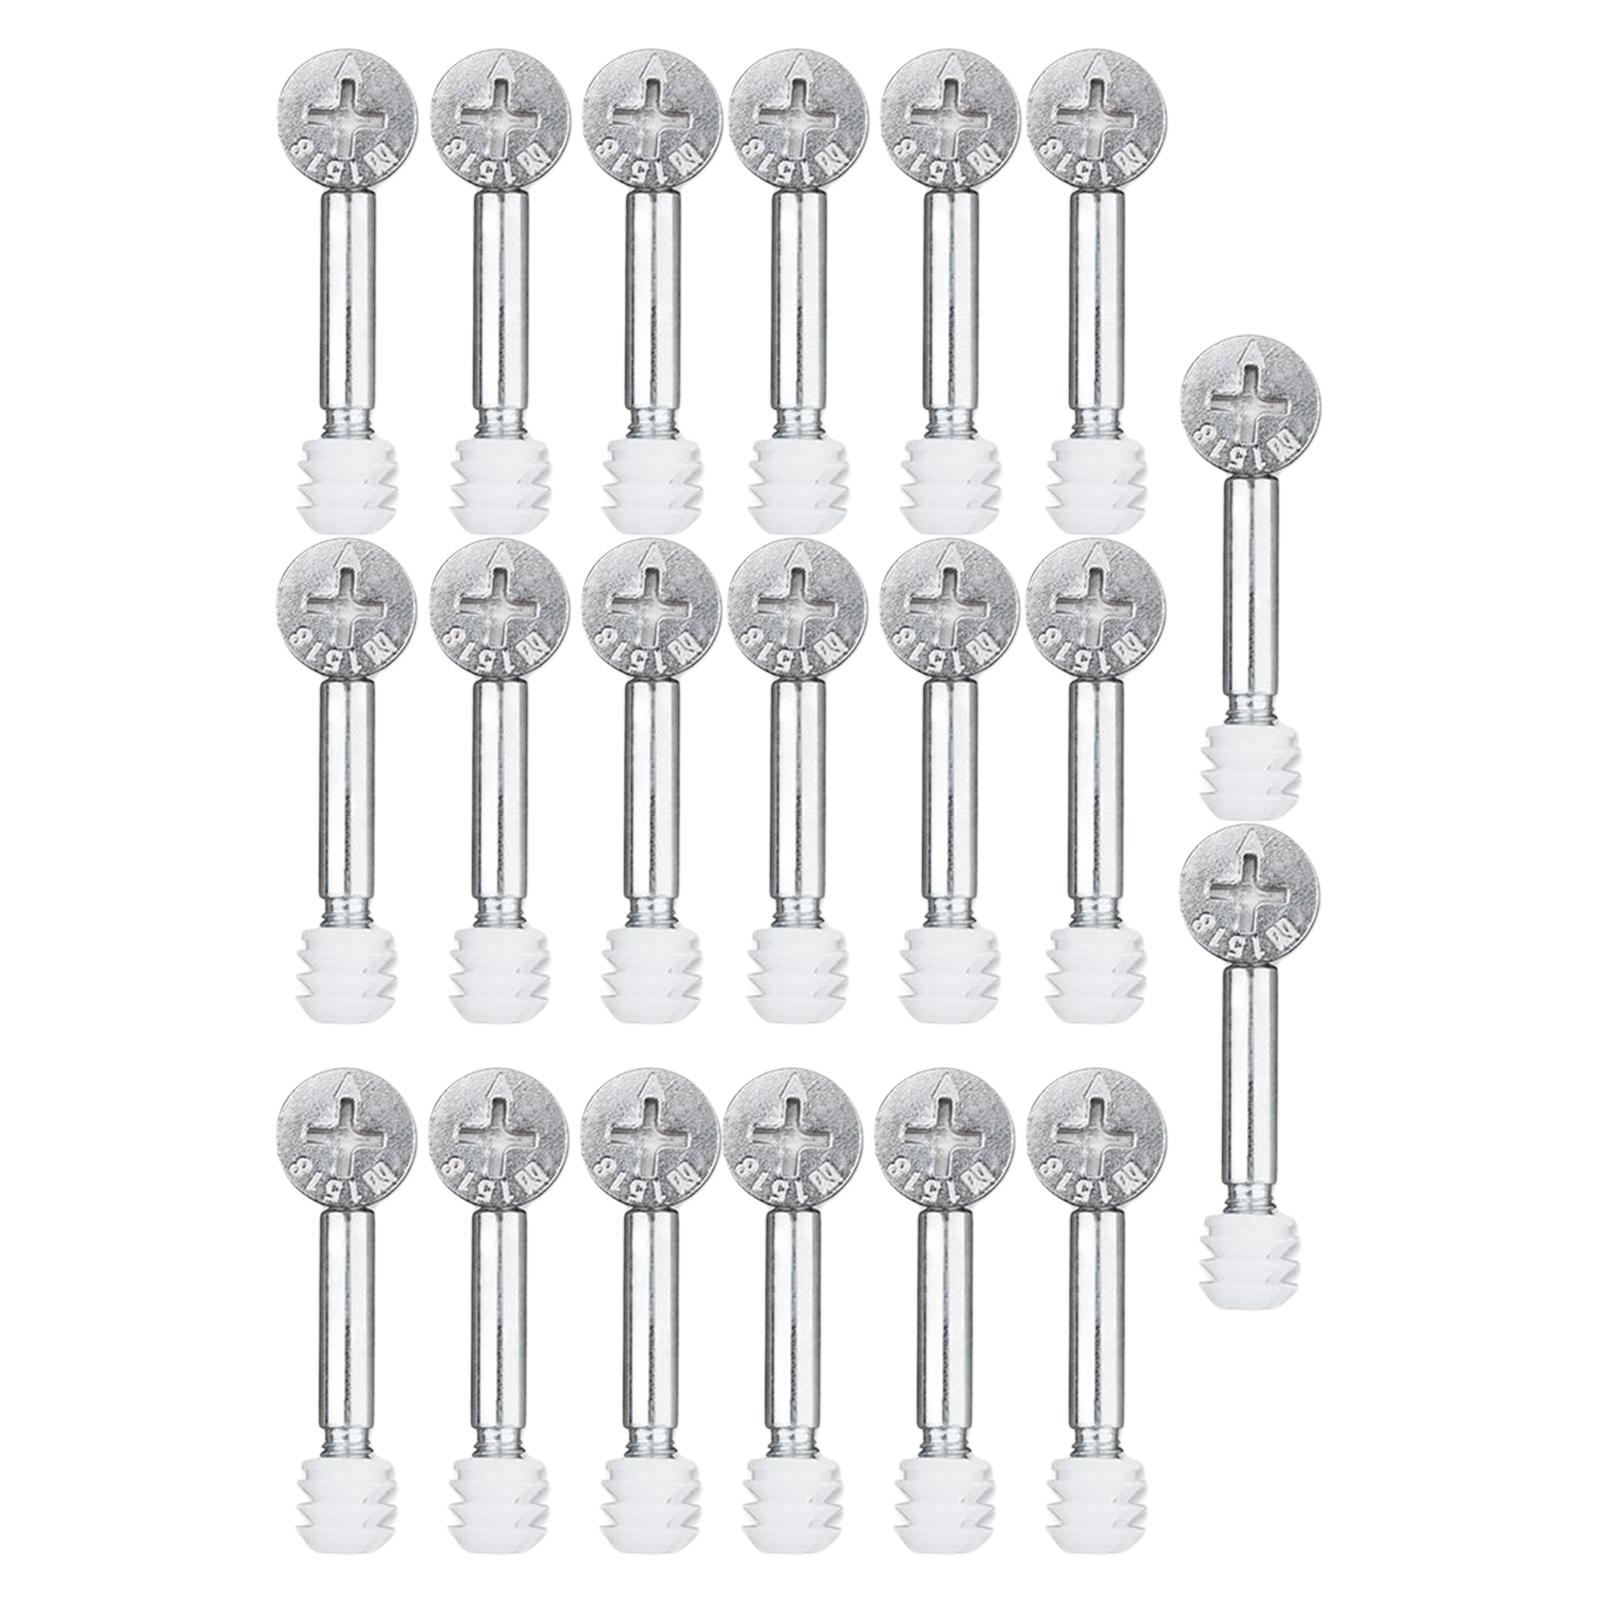 20 Sets Furniture Connecting Cam Fitting with Dowel Pre inserted Nut 3 in 1